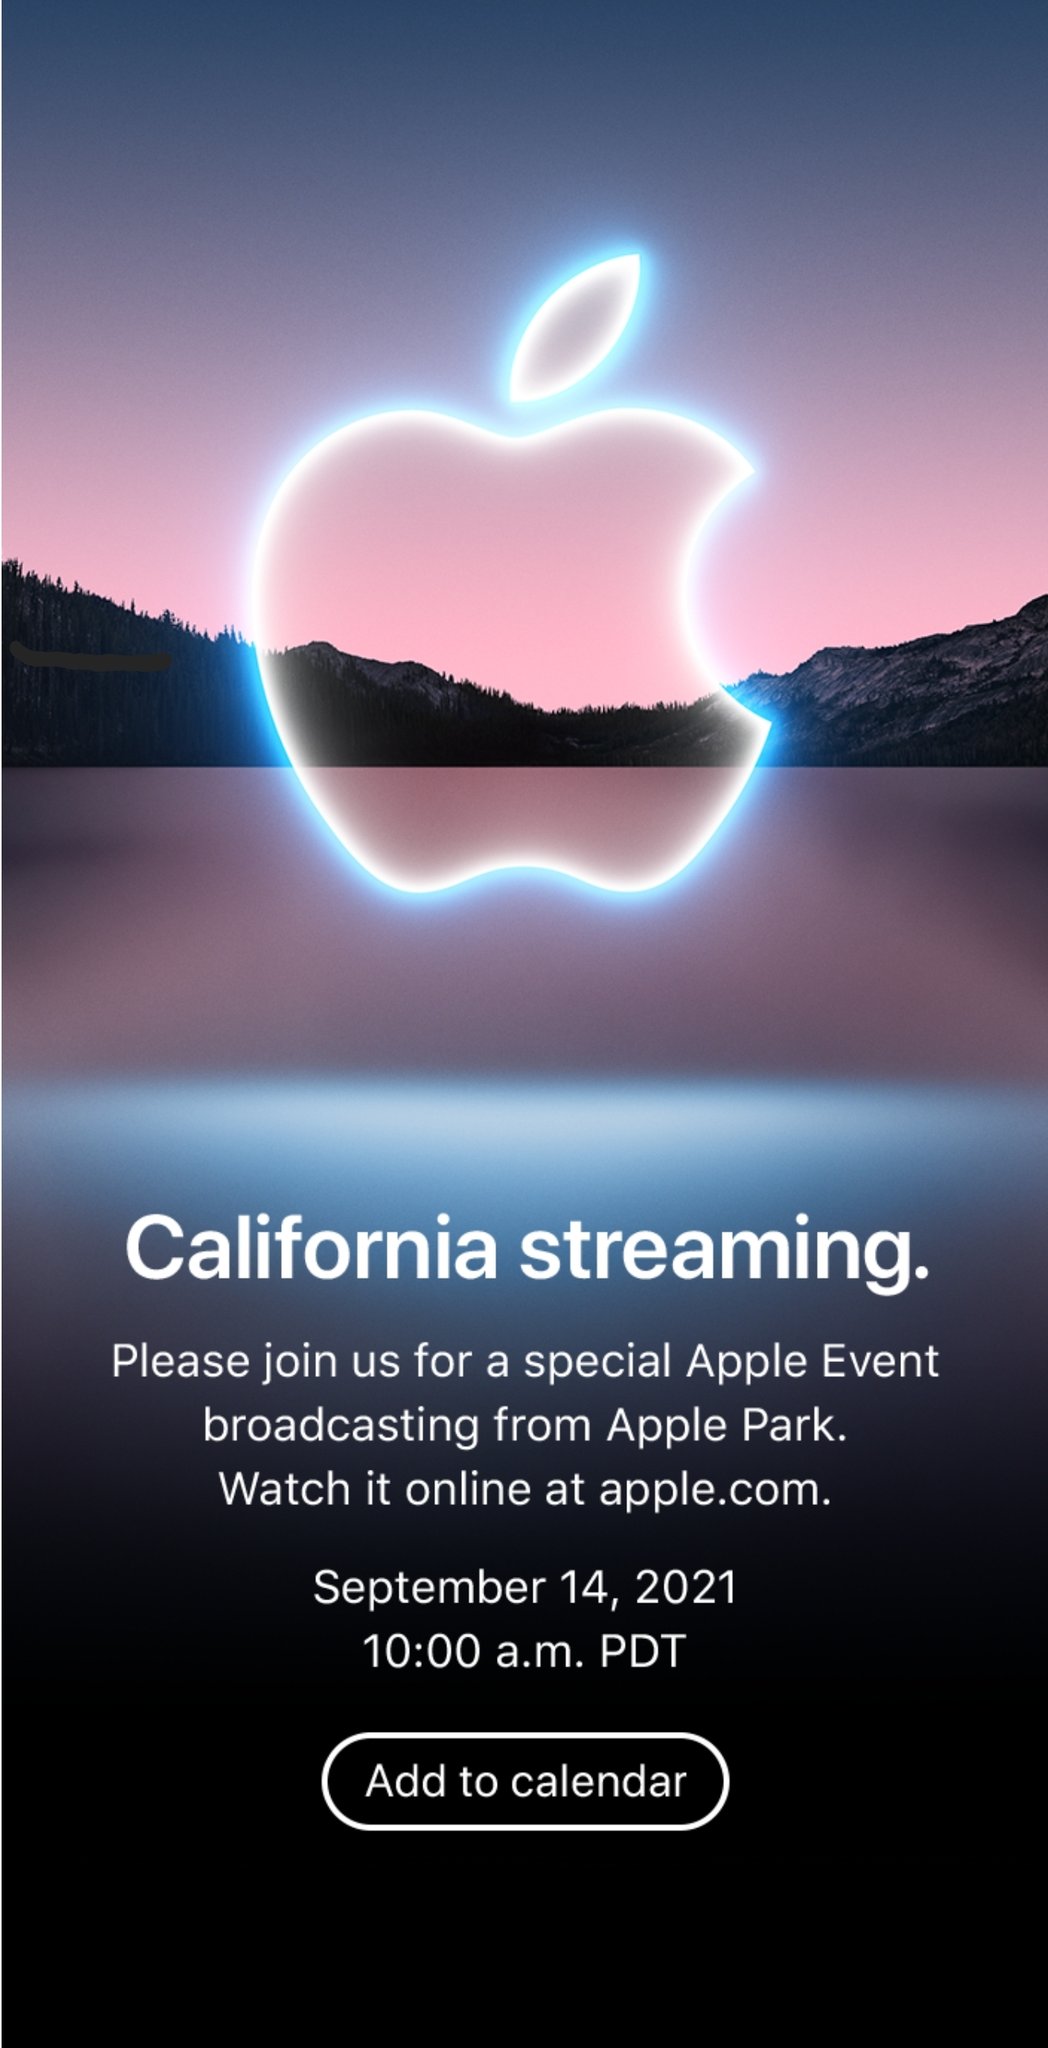 A clear and minimal promo of an Apple online streaming event